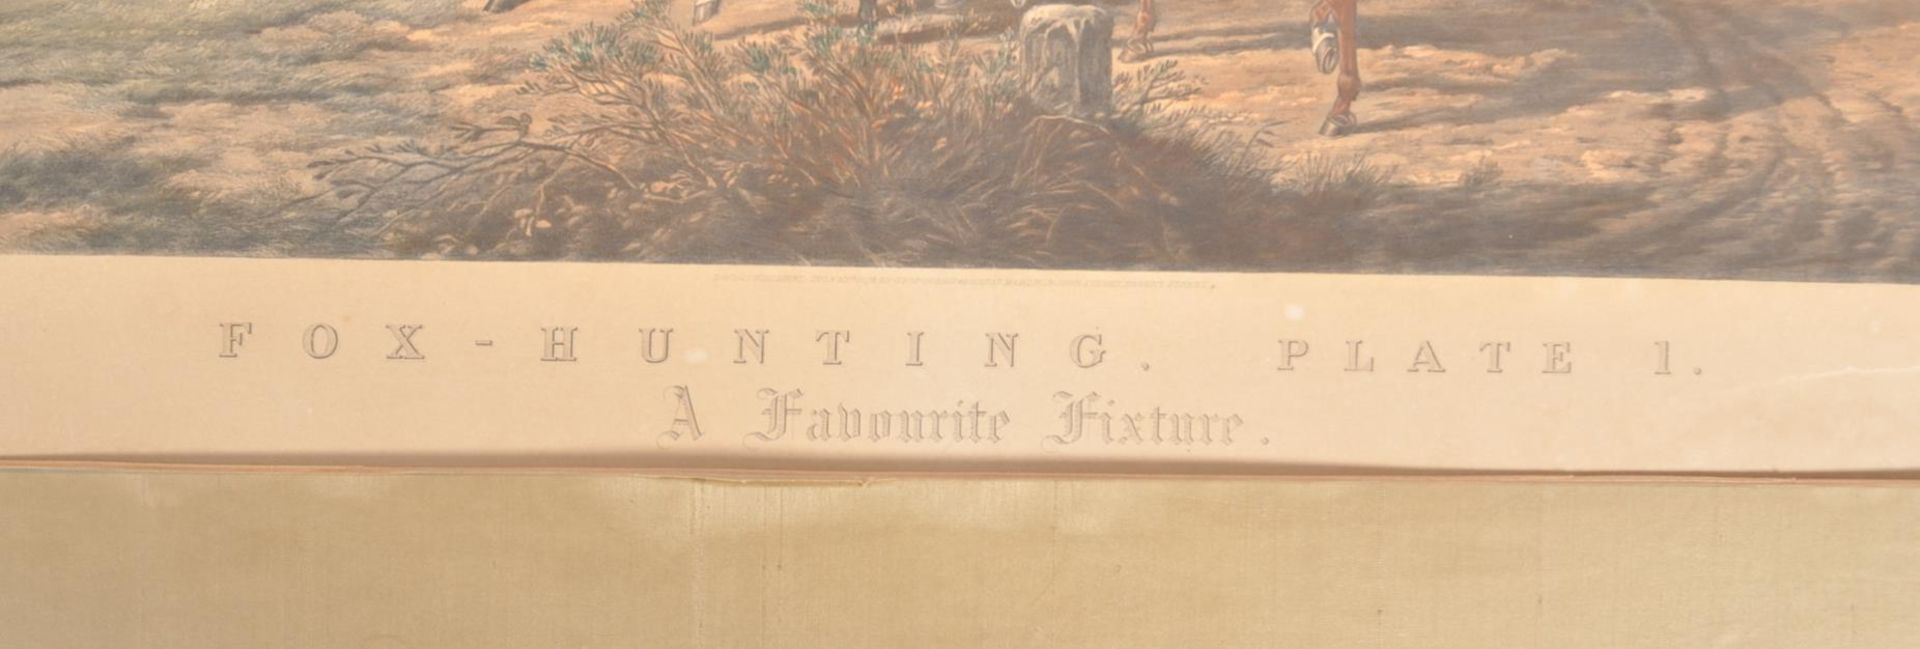 AFTER JOHN STURGESS - 'FOX-HUNTING PLATE 1 - A FAVOURITE FIXTURE' - Image 3 of 6